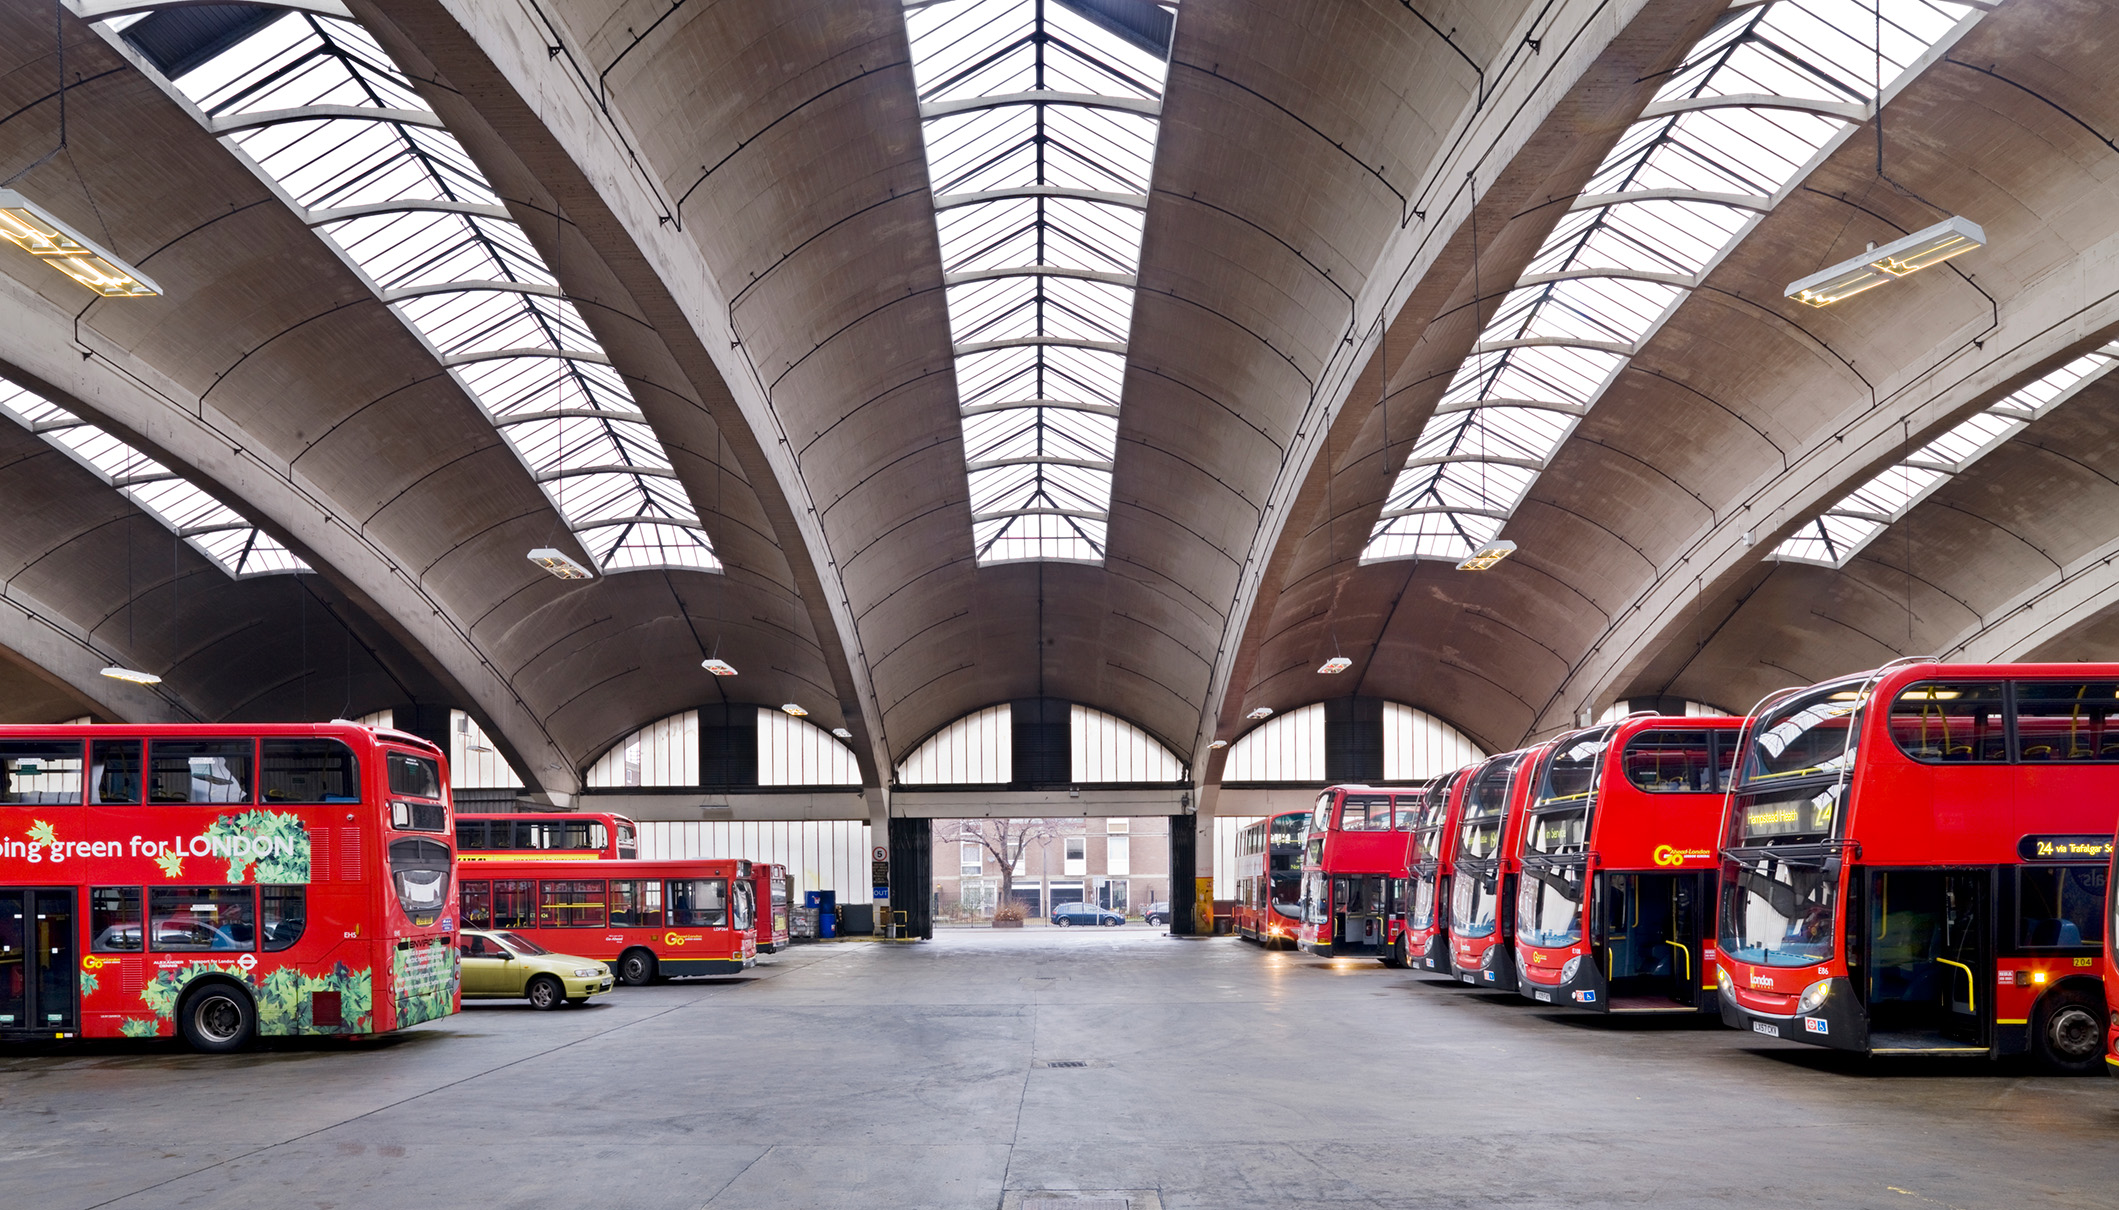 Stockwell Bus Garage 1951 to 1954